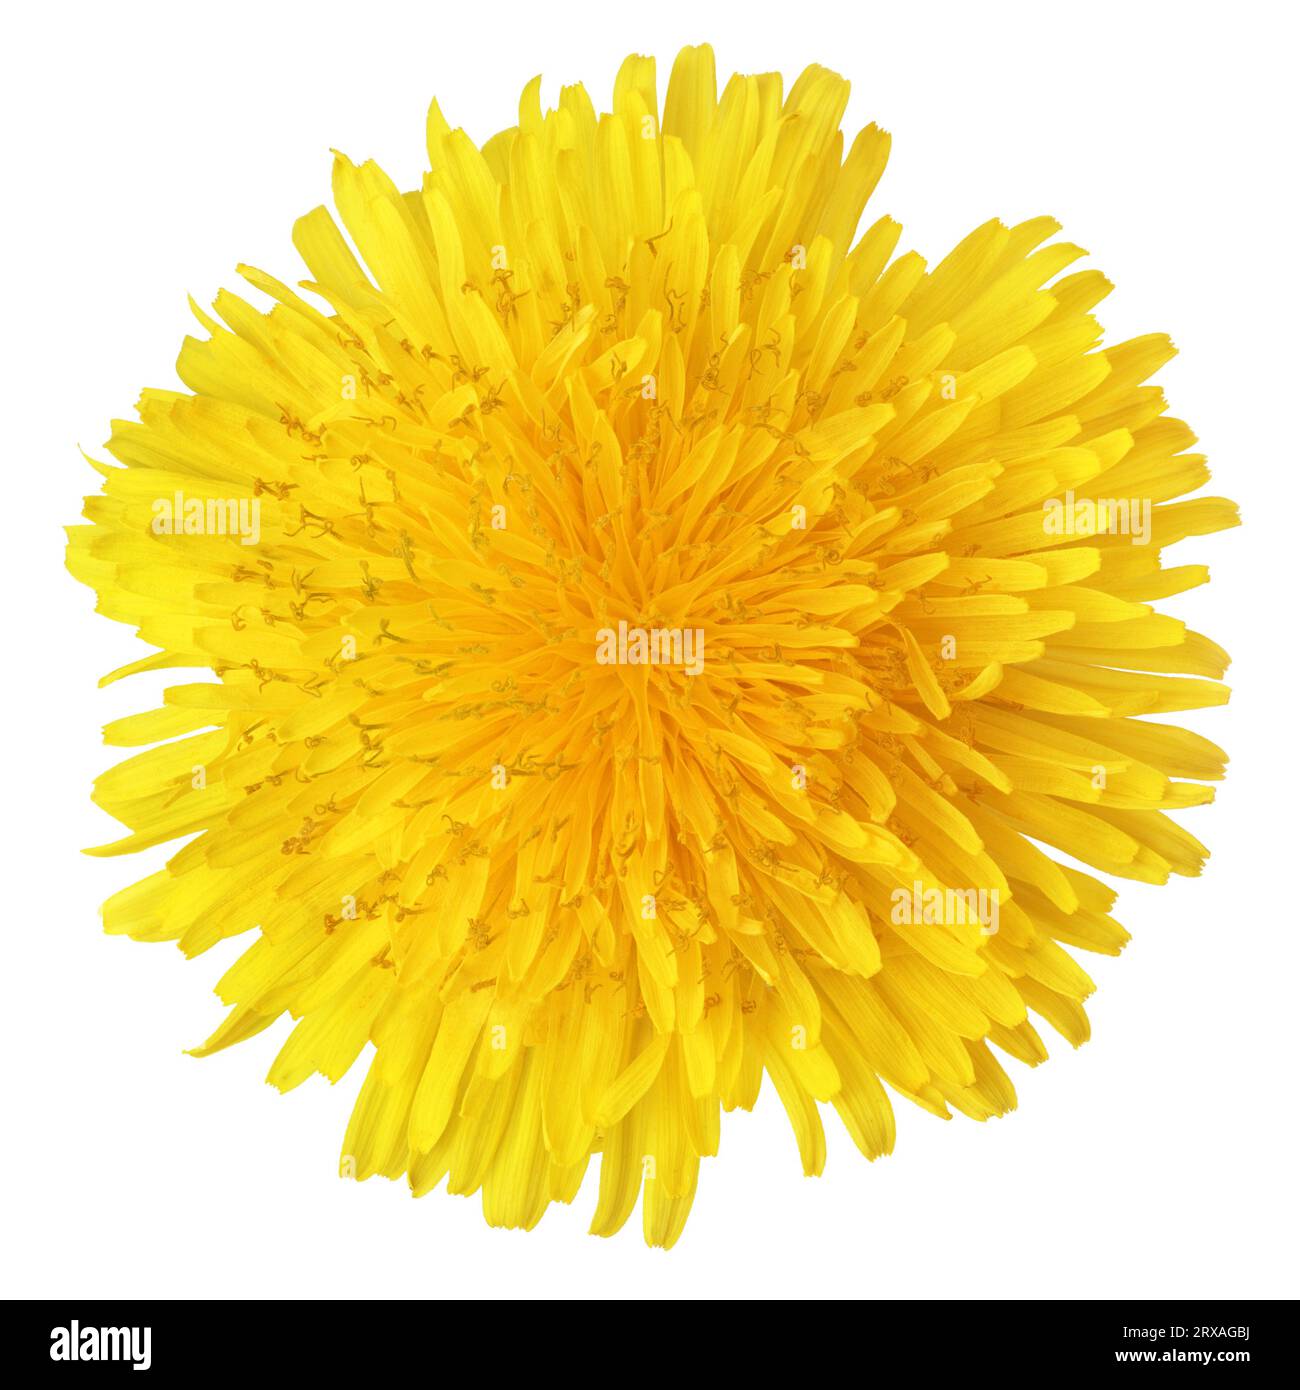 Top view of yellow dandelion flower isolated on white Stock Photo